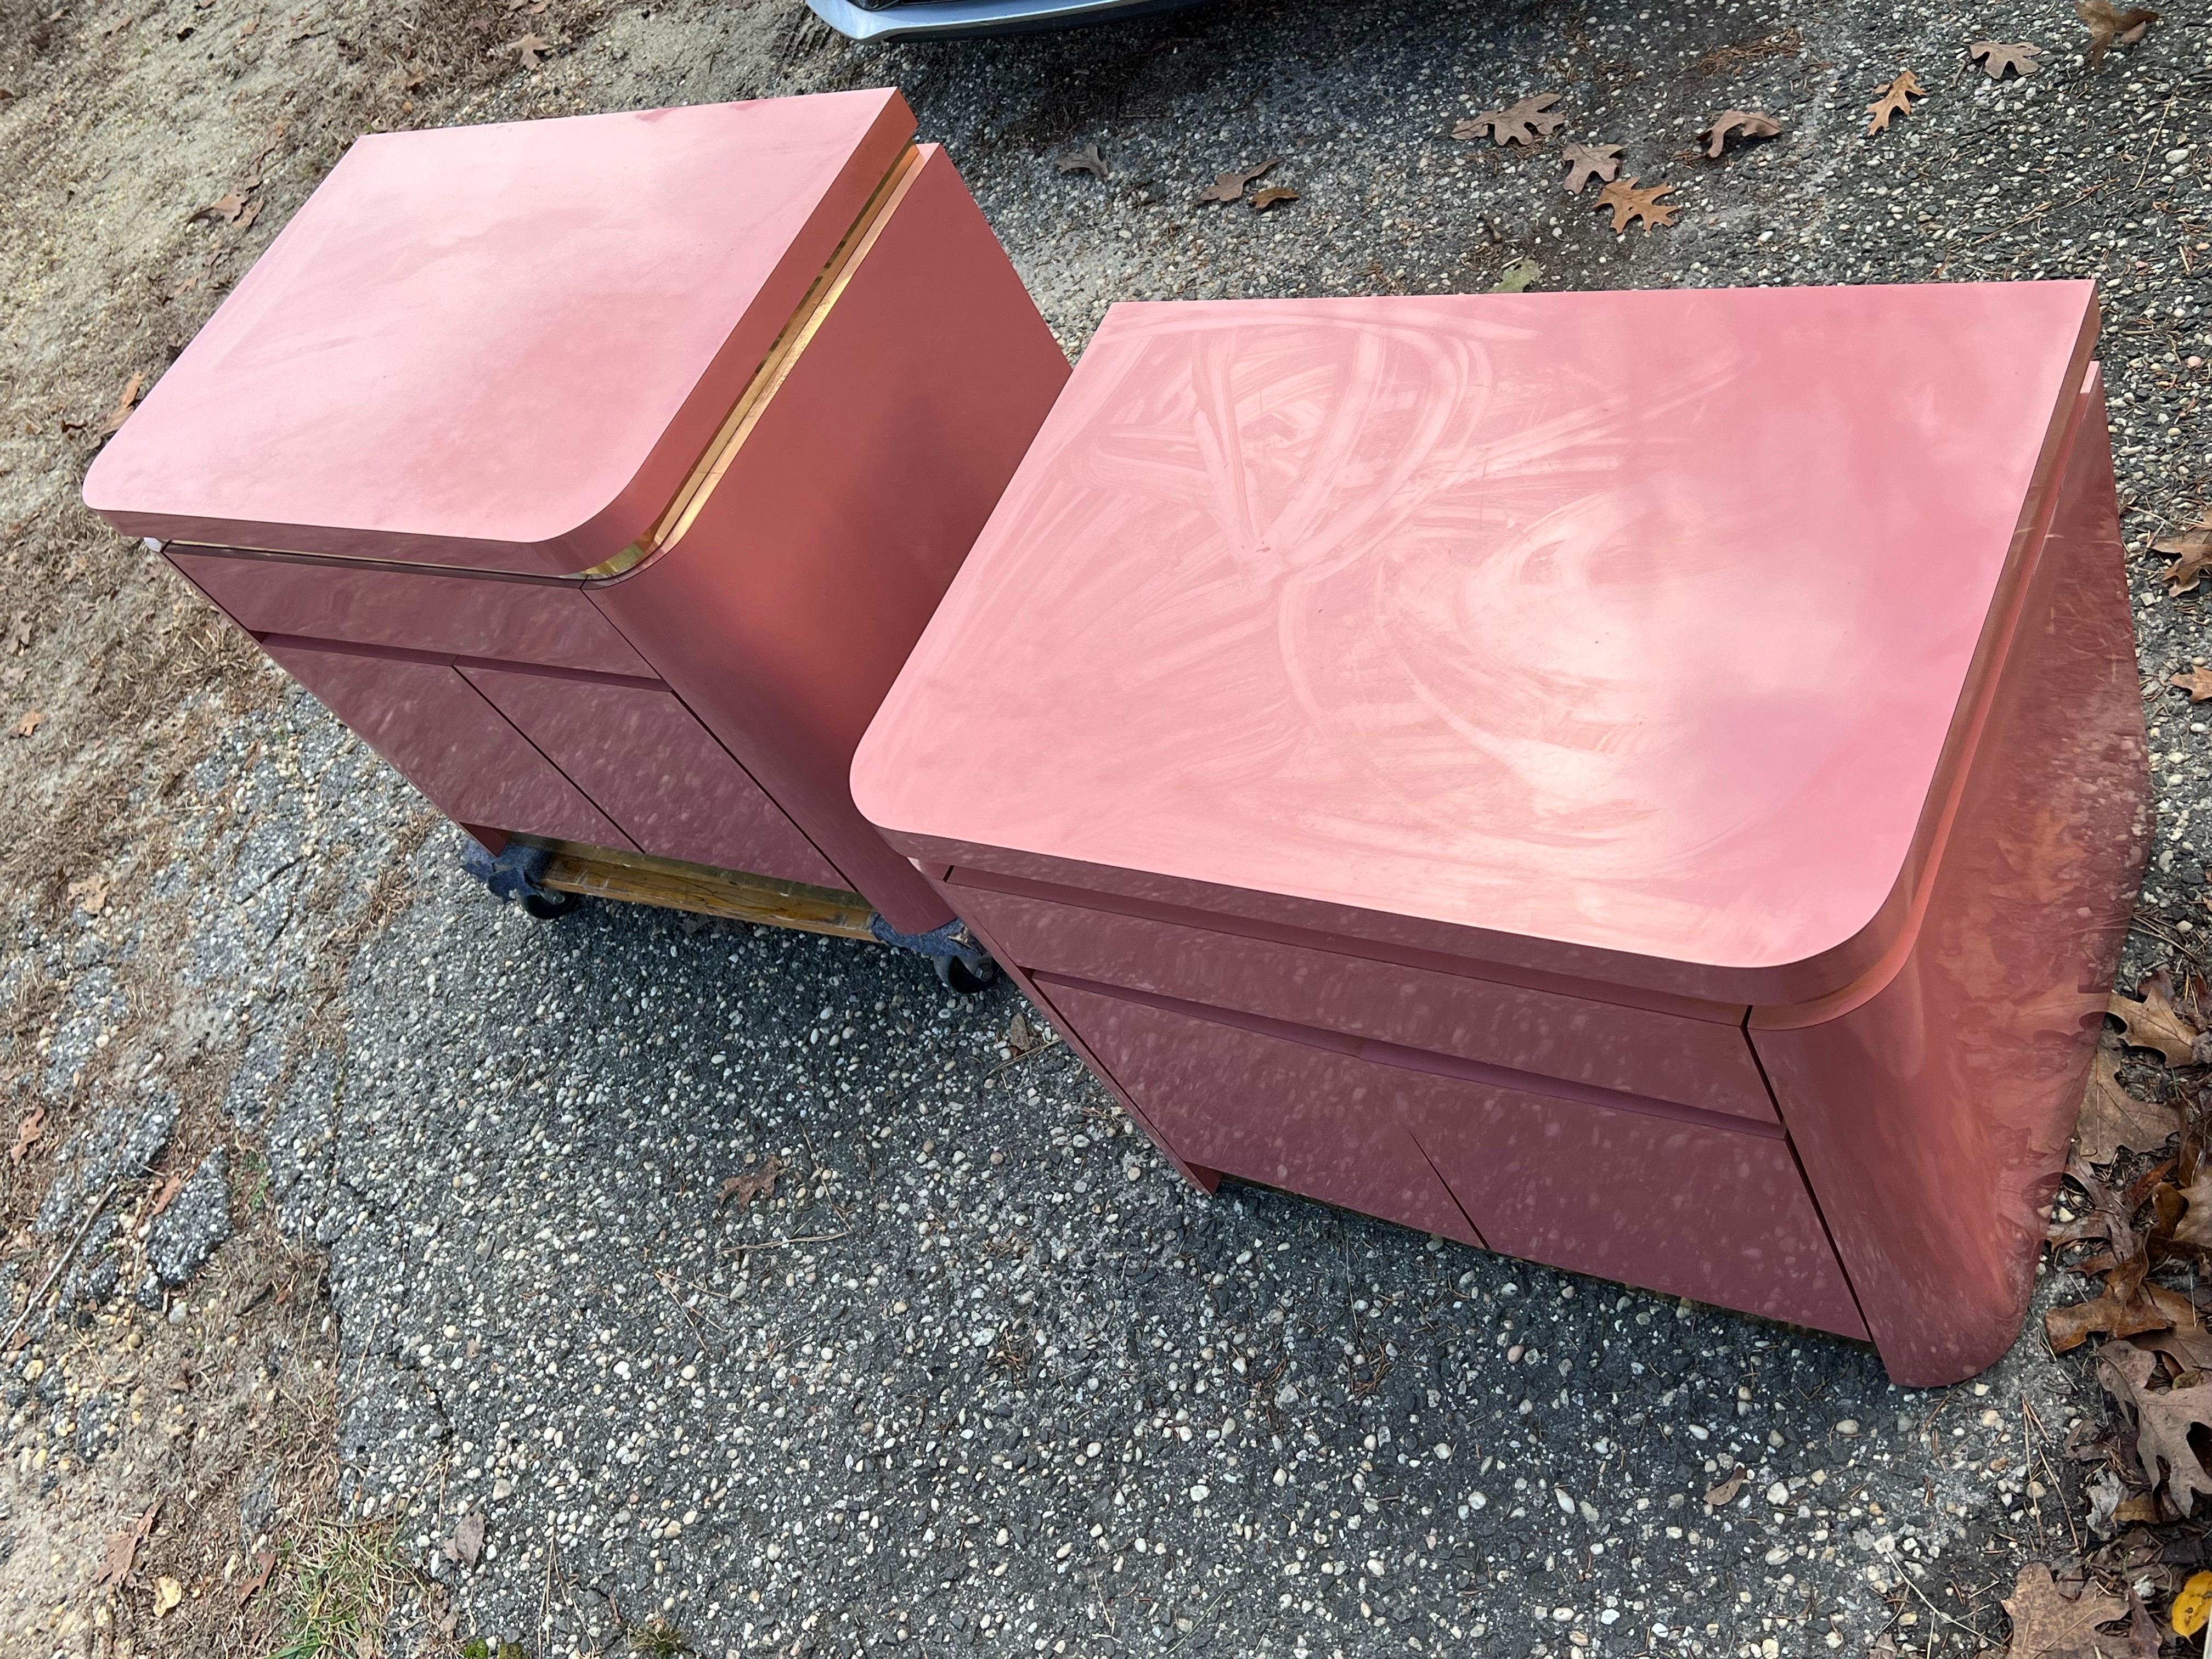 1980 Mauve Pink Laminate Nightstands - a Pair

Custom made in 1980 with the beautiful brass trims. We have the matching King headboard and platform posted in a separate listing.